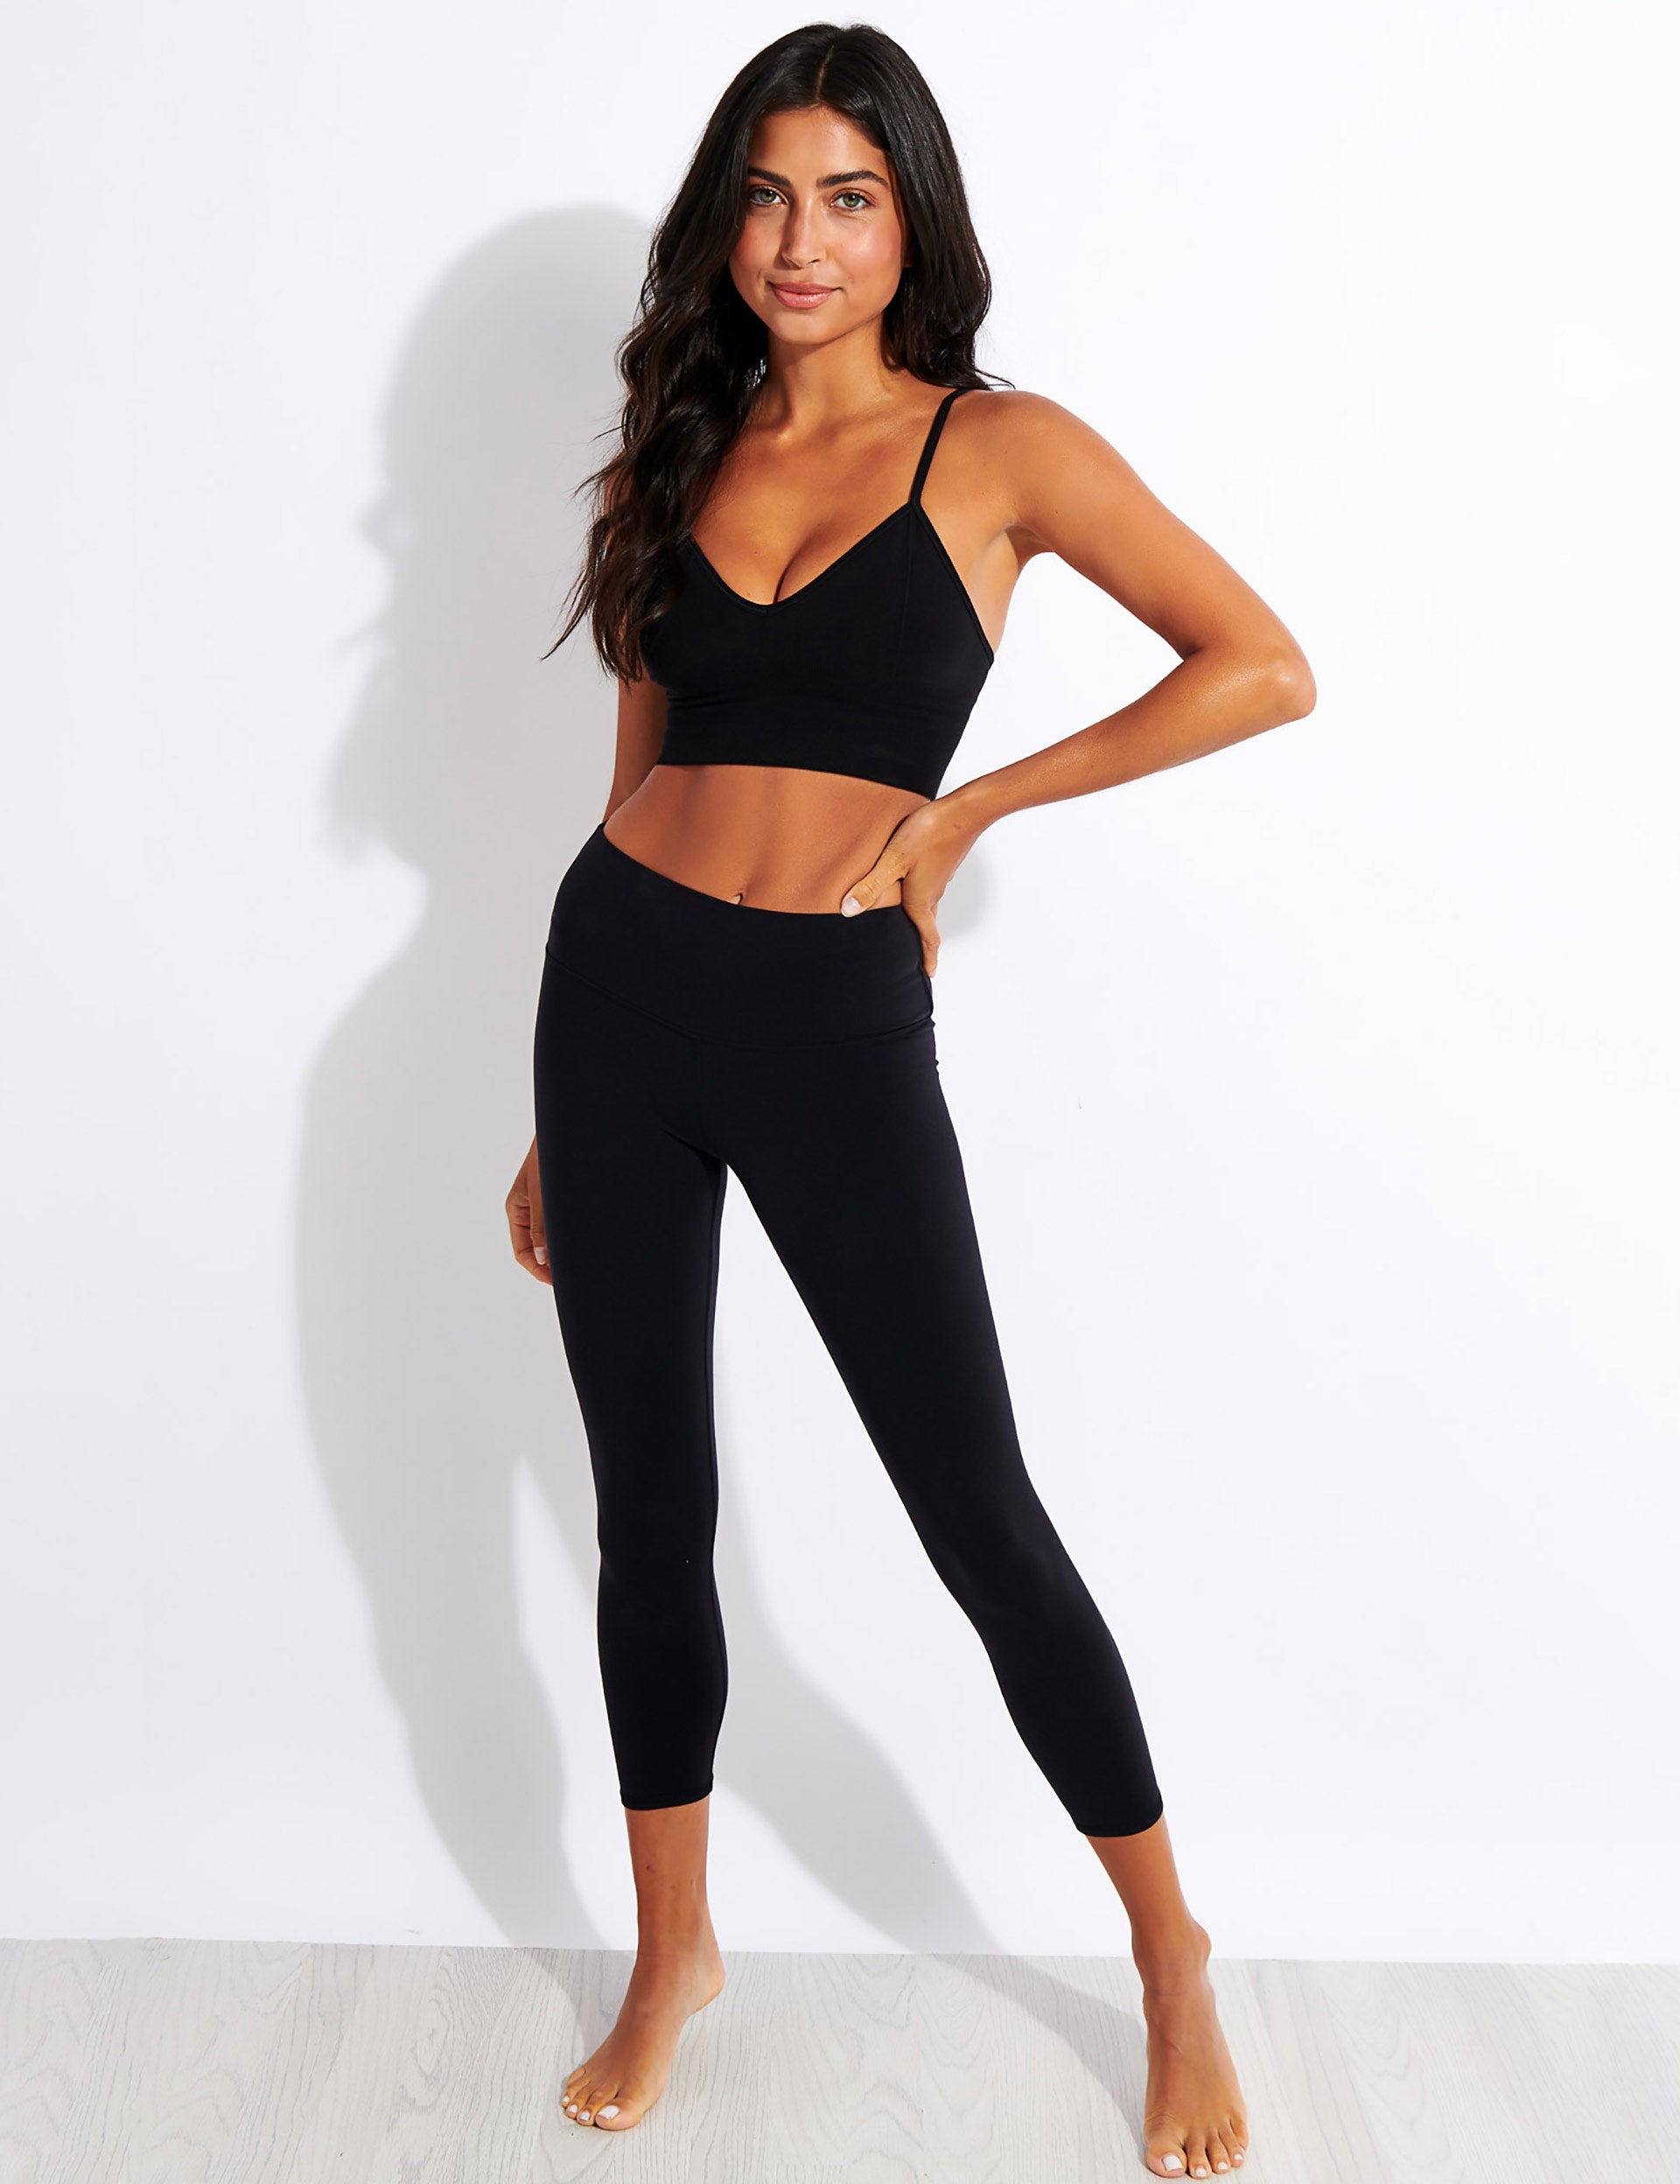 Women's Alo Yoga Tops from $48